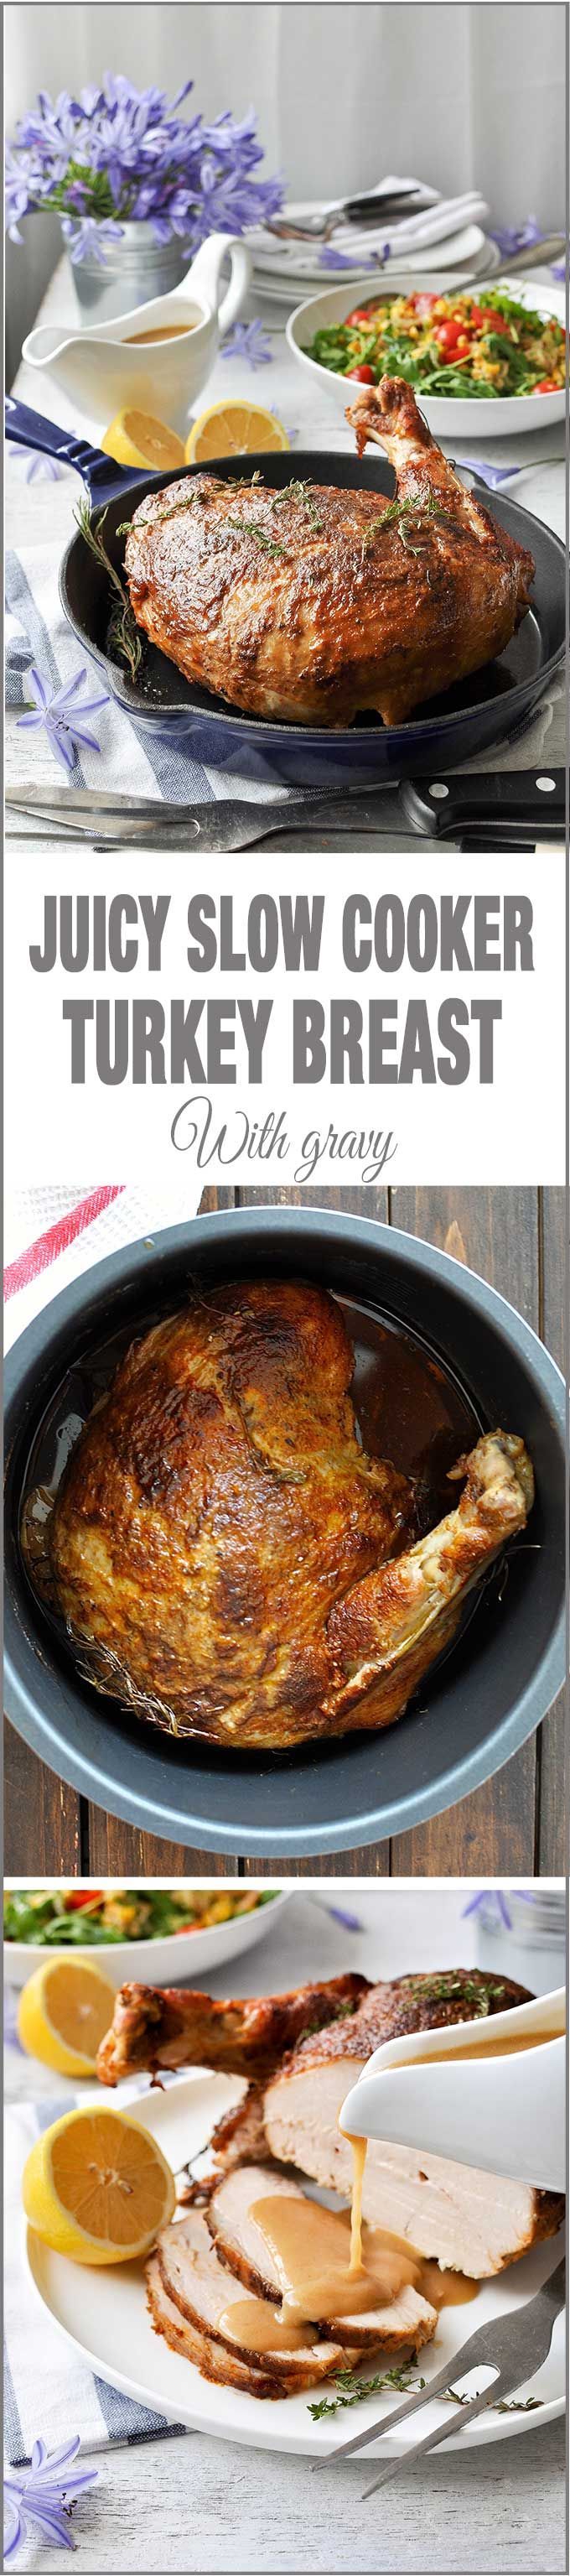 Juicy Slow Cooker Turkey – the no fail EASY way to make turkey breast that comes out juicy with a fabulous gravy!